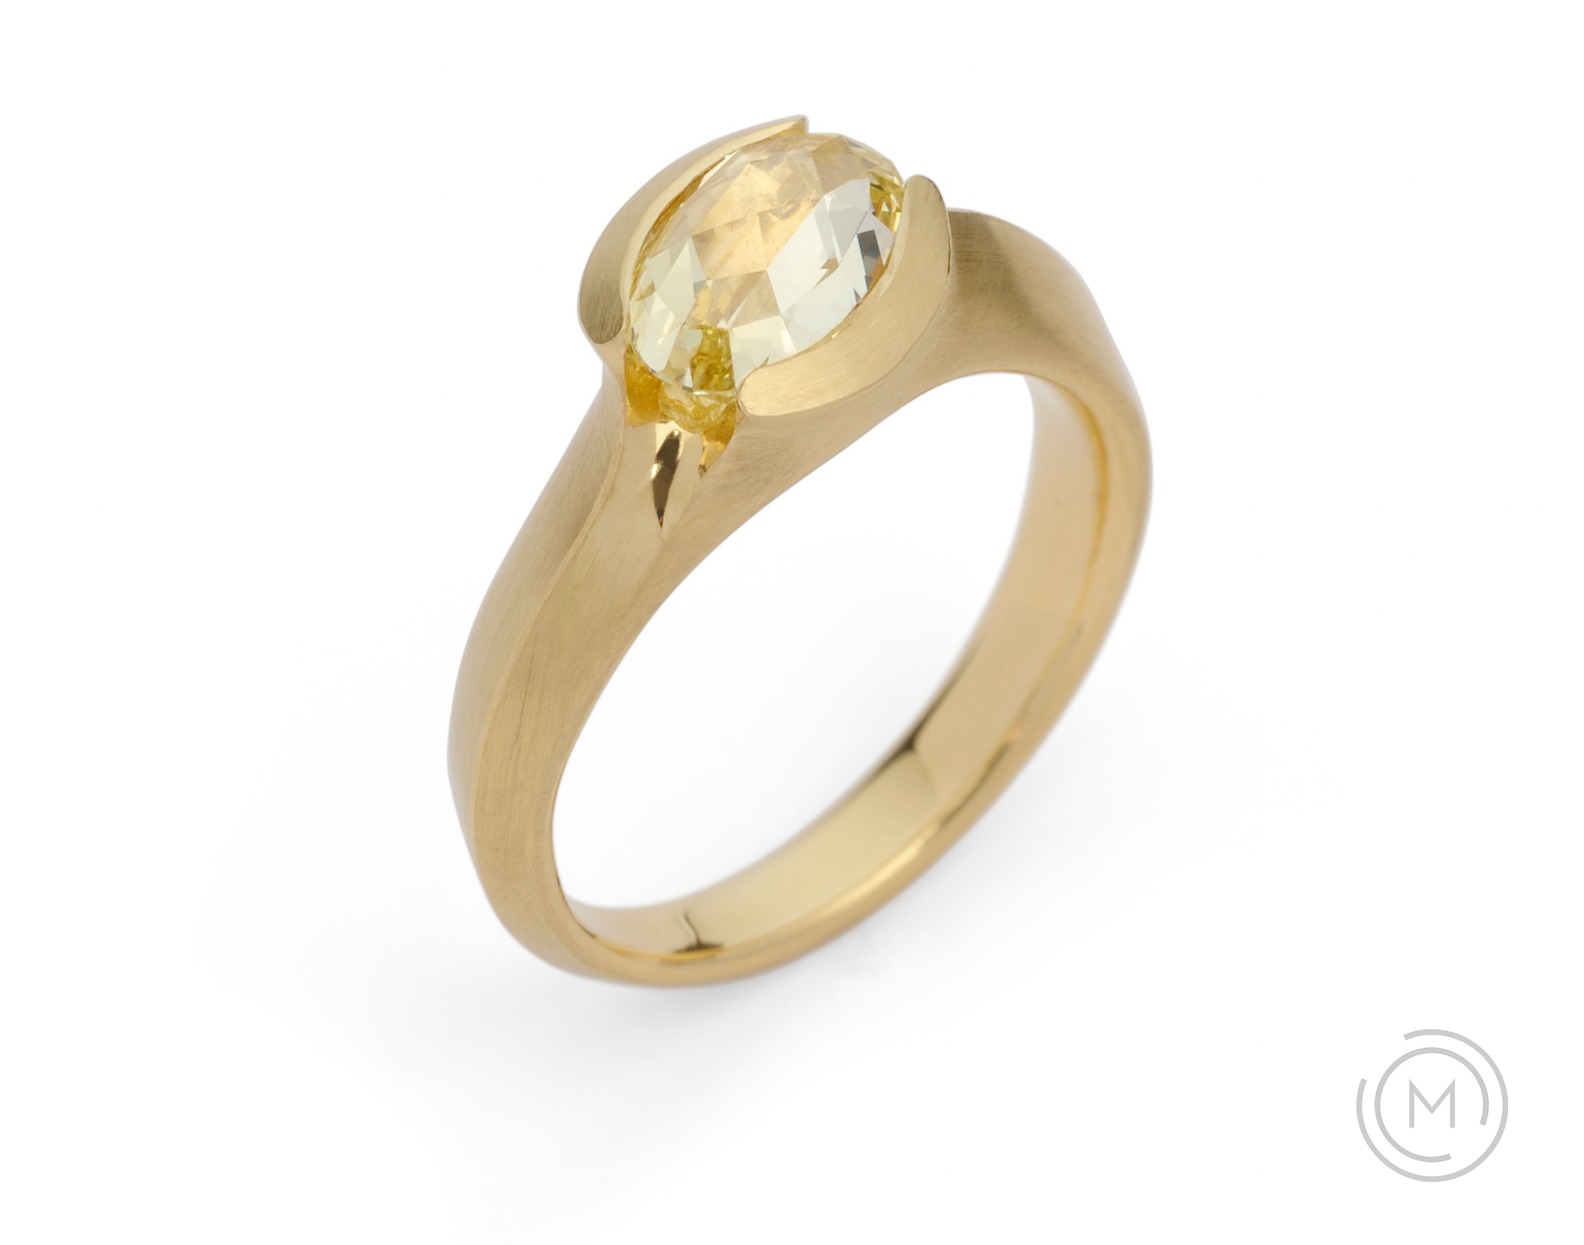 Hand carved yellow gold and rose cut diamond solitaire engagement ring